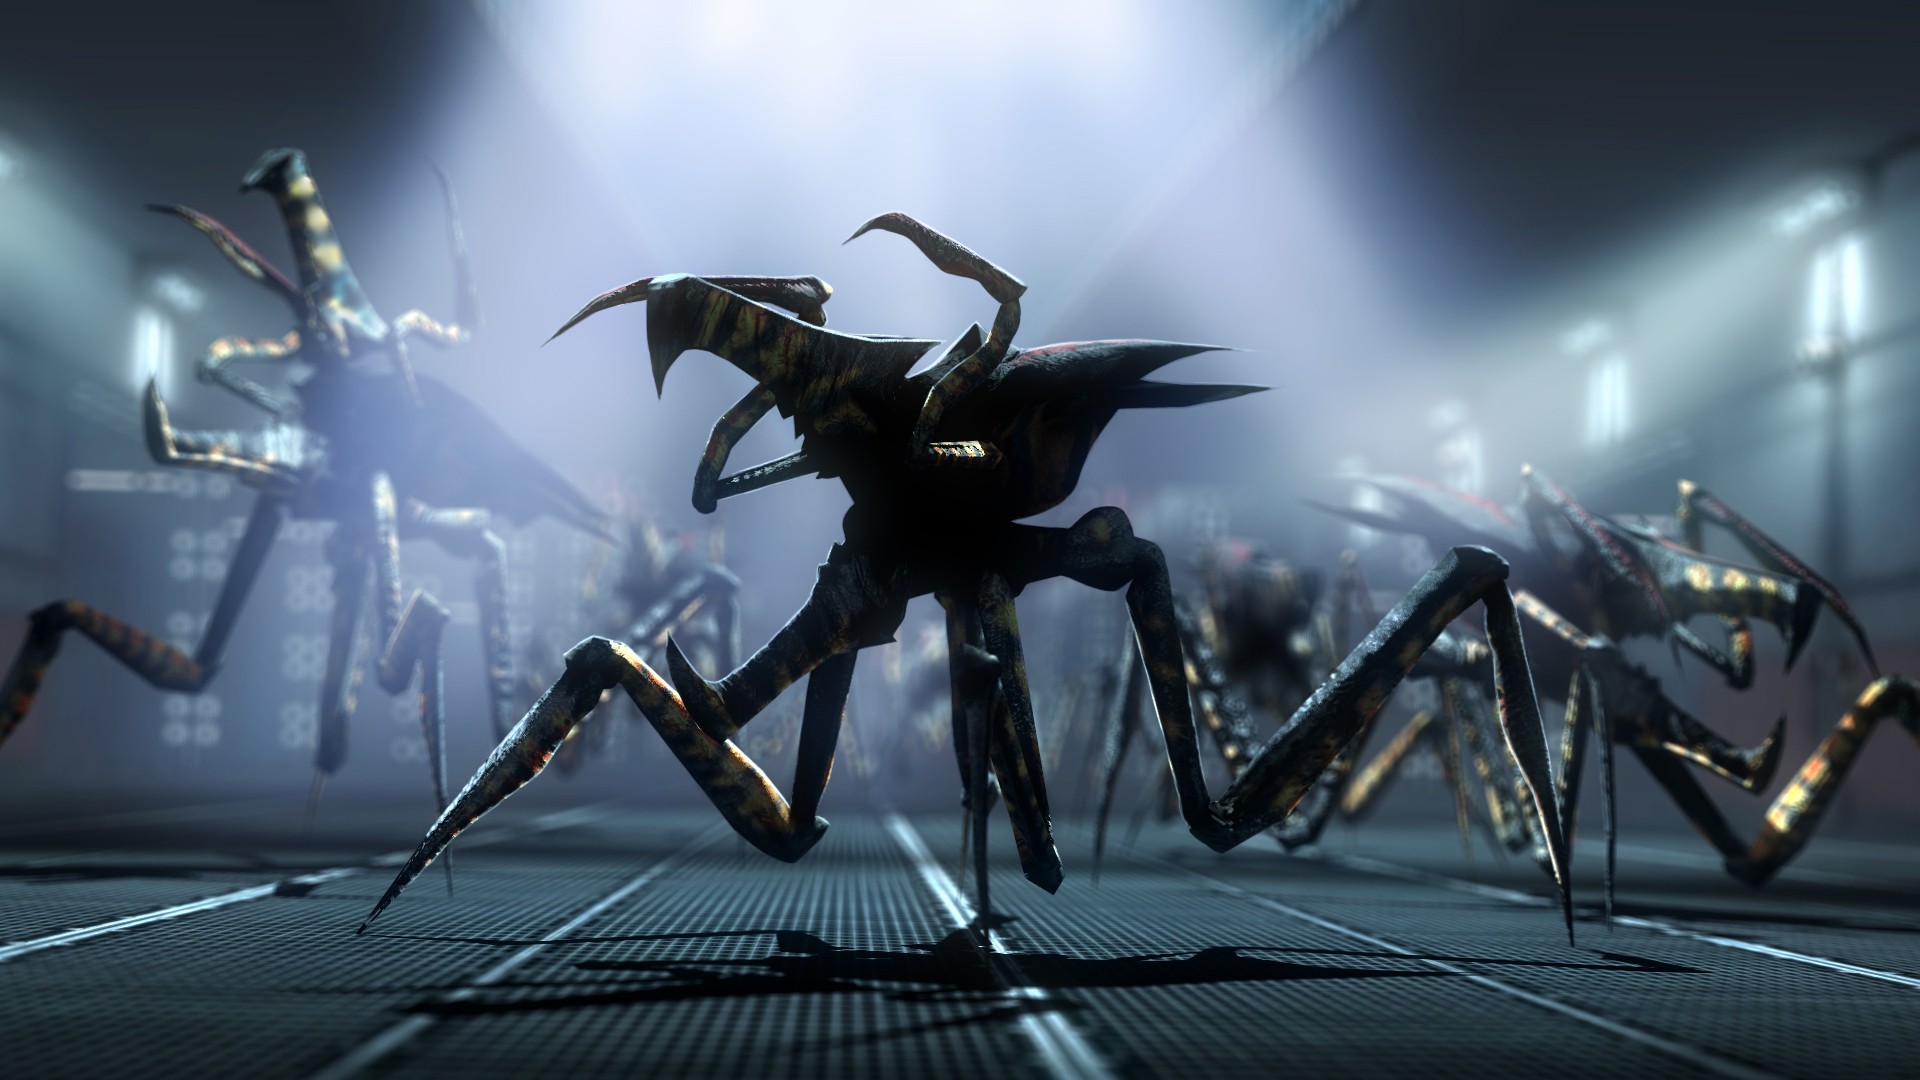 Space Universe Arachnids Aliens Creature Movies Screen Shot Military Base Starship Troopers 1920x1080